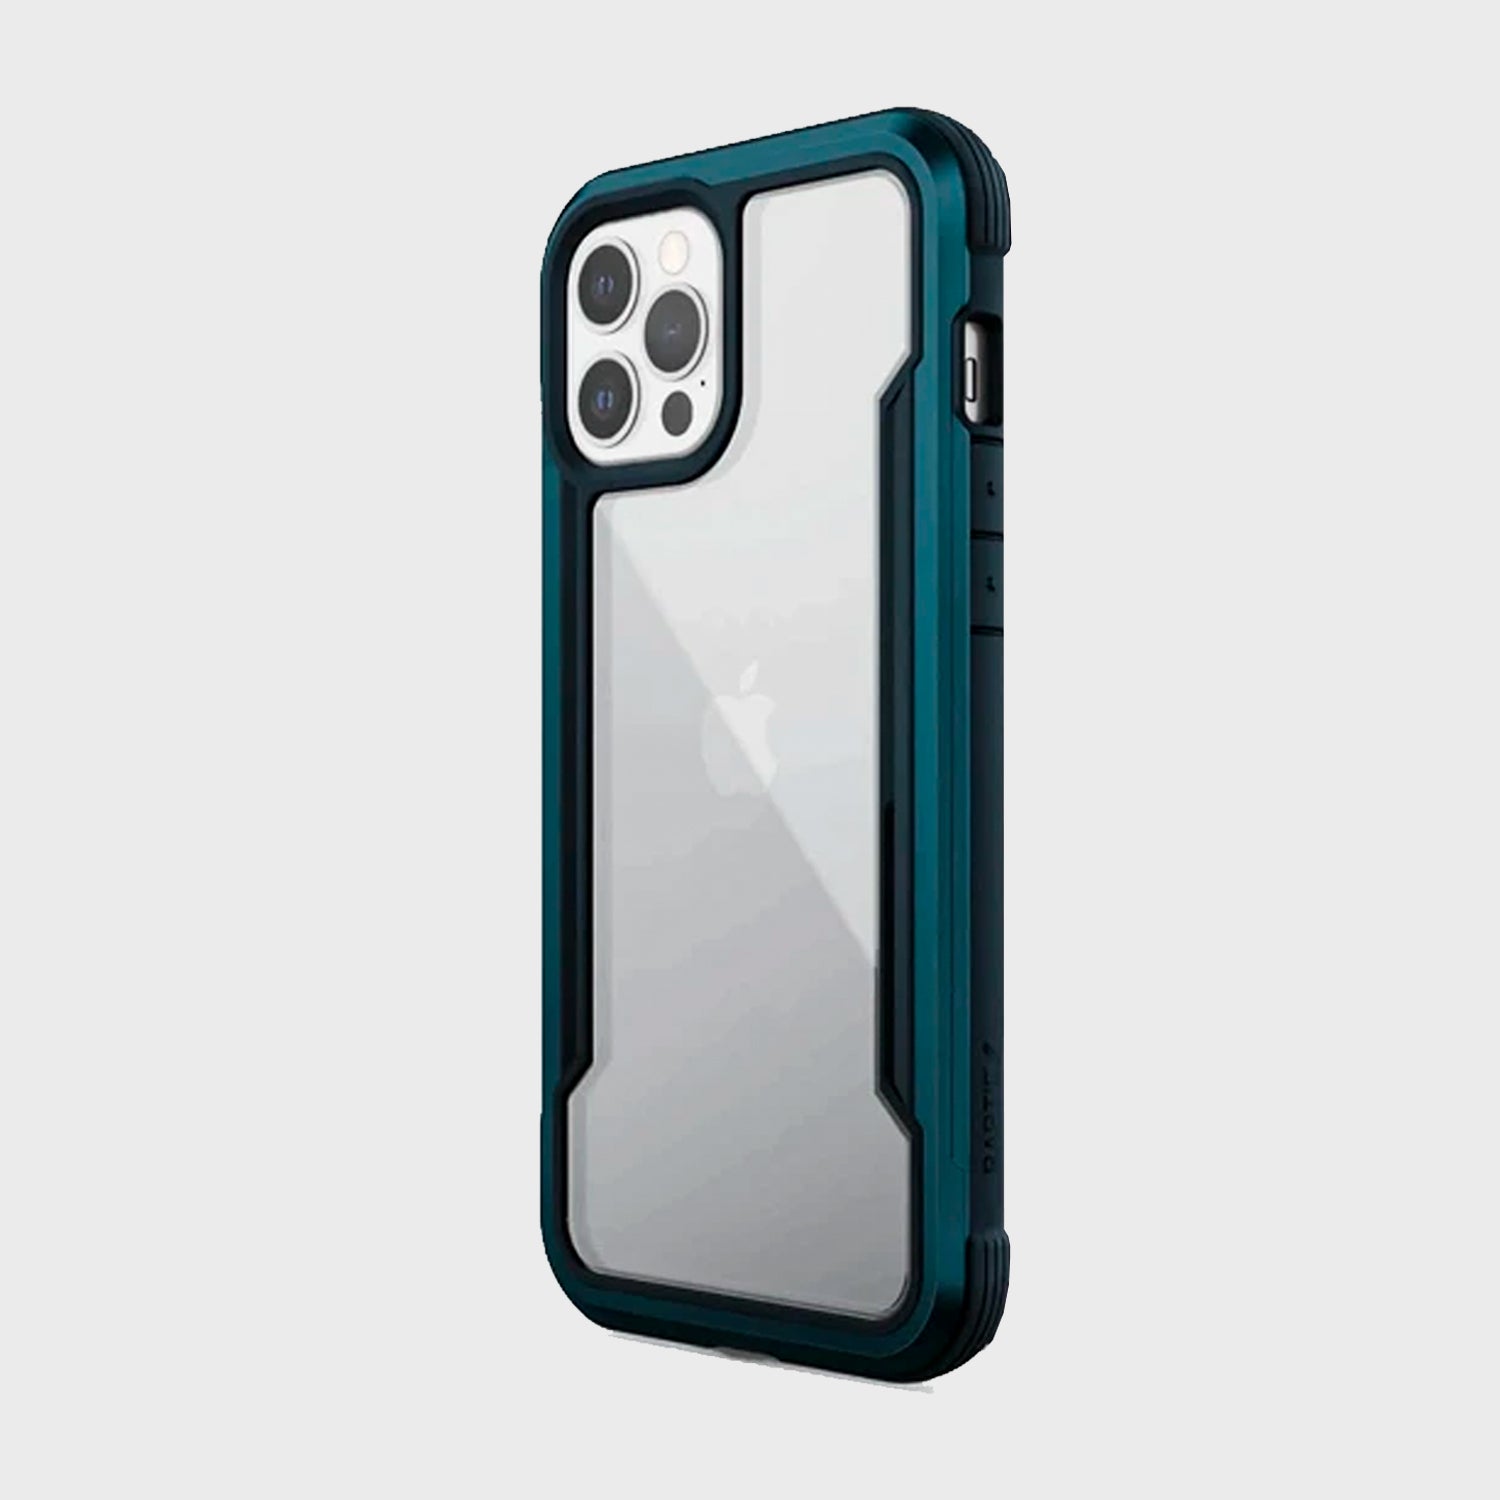 The Raptic iPhone 12 & iPhone 12 Pro Case - SHIELD provides protection and is shown in teal, suitable for iPhone 12 and iPhone 12 Pro.